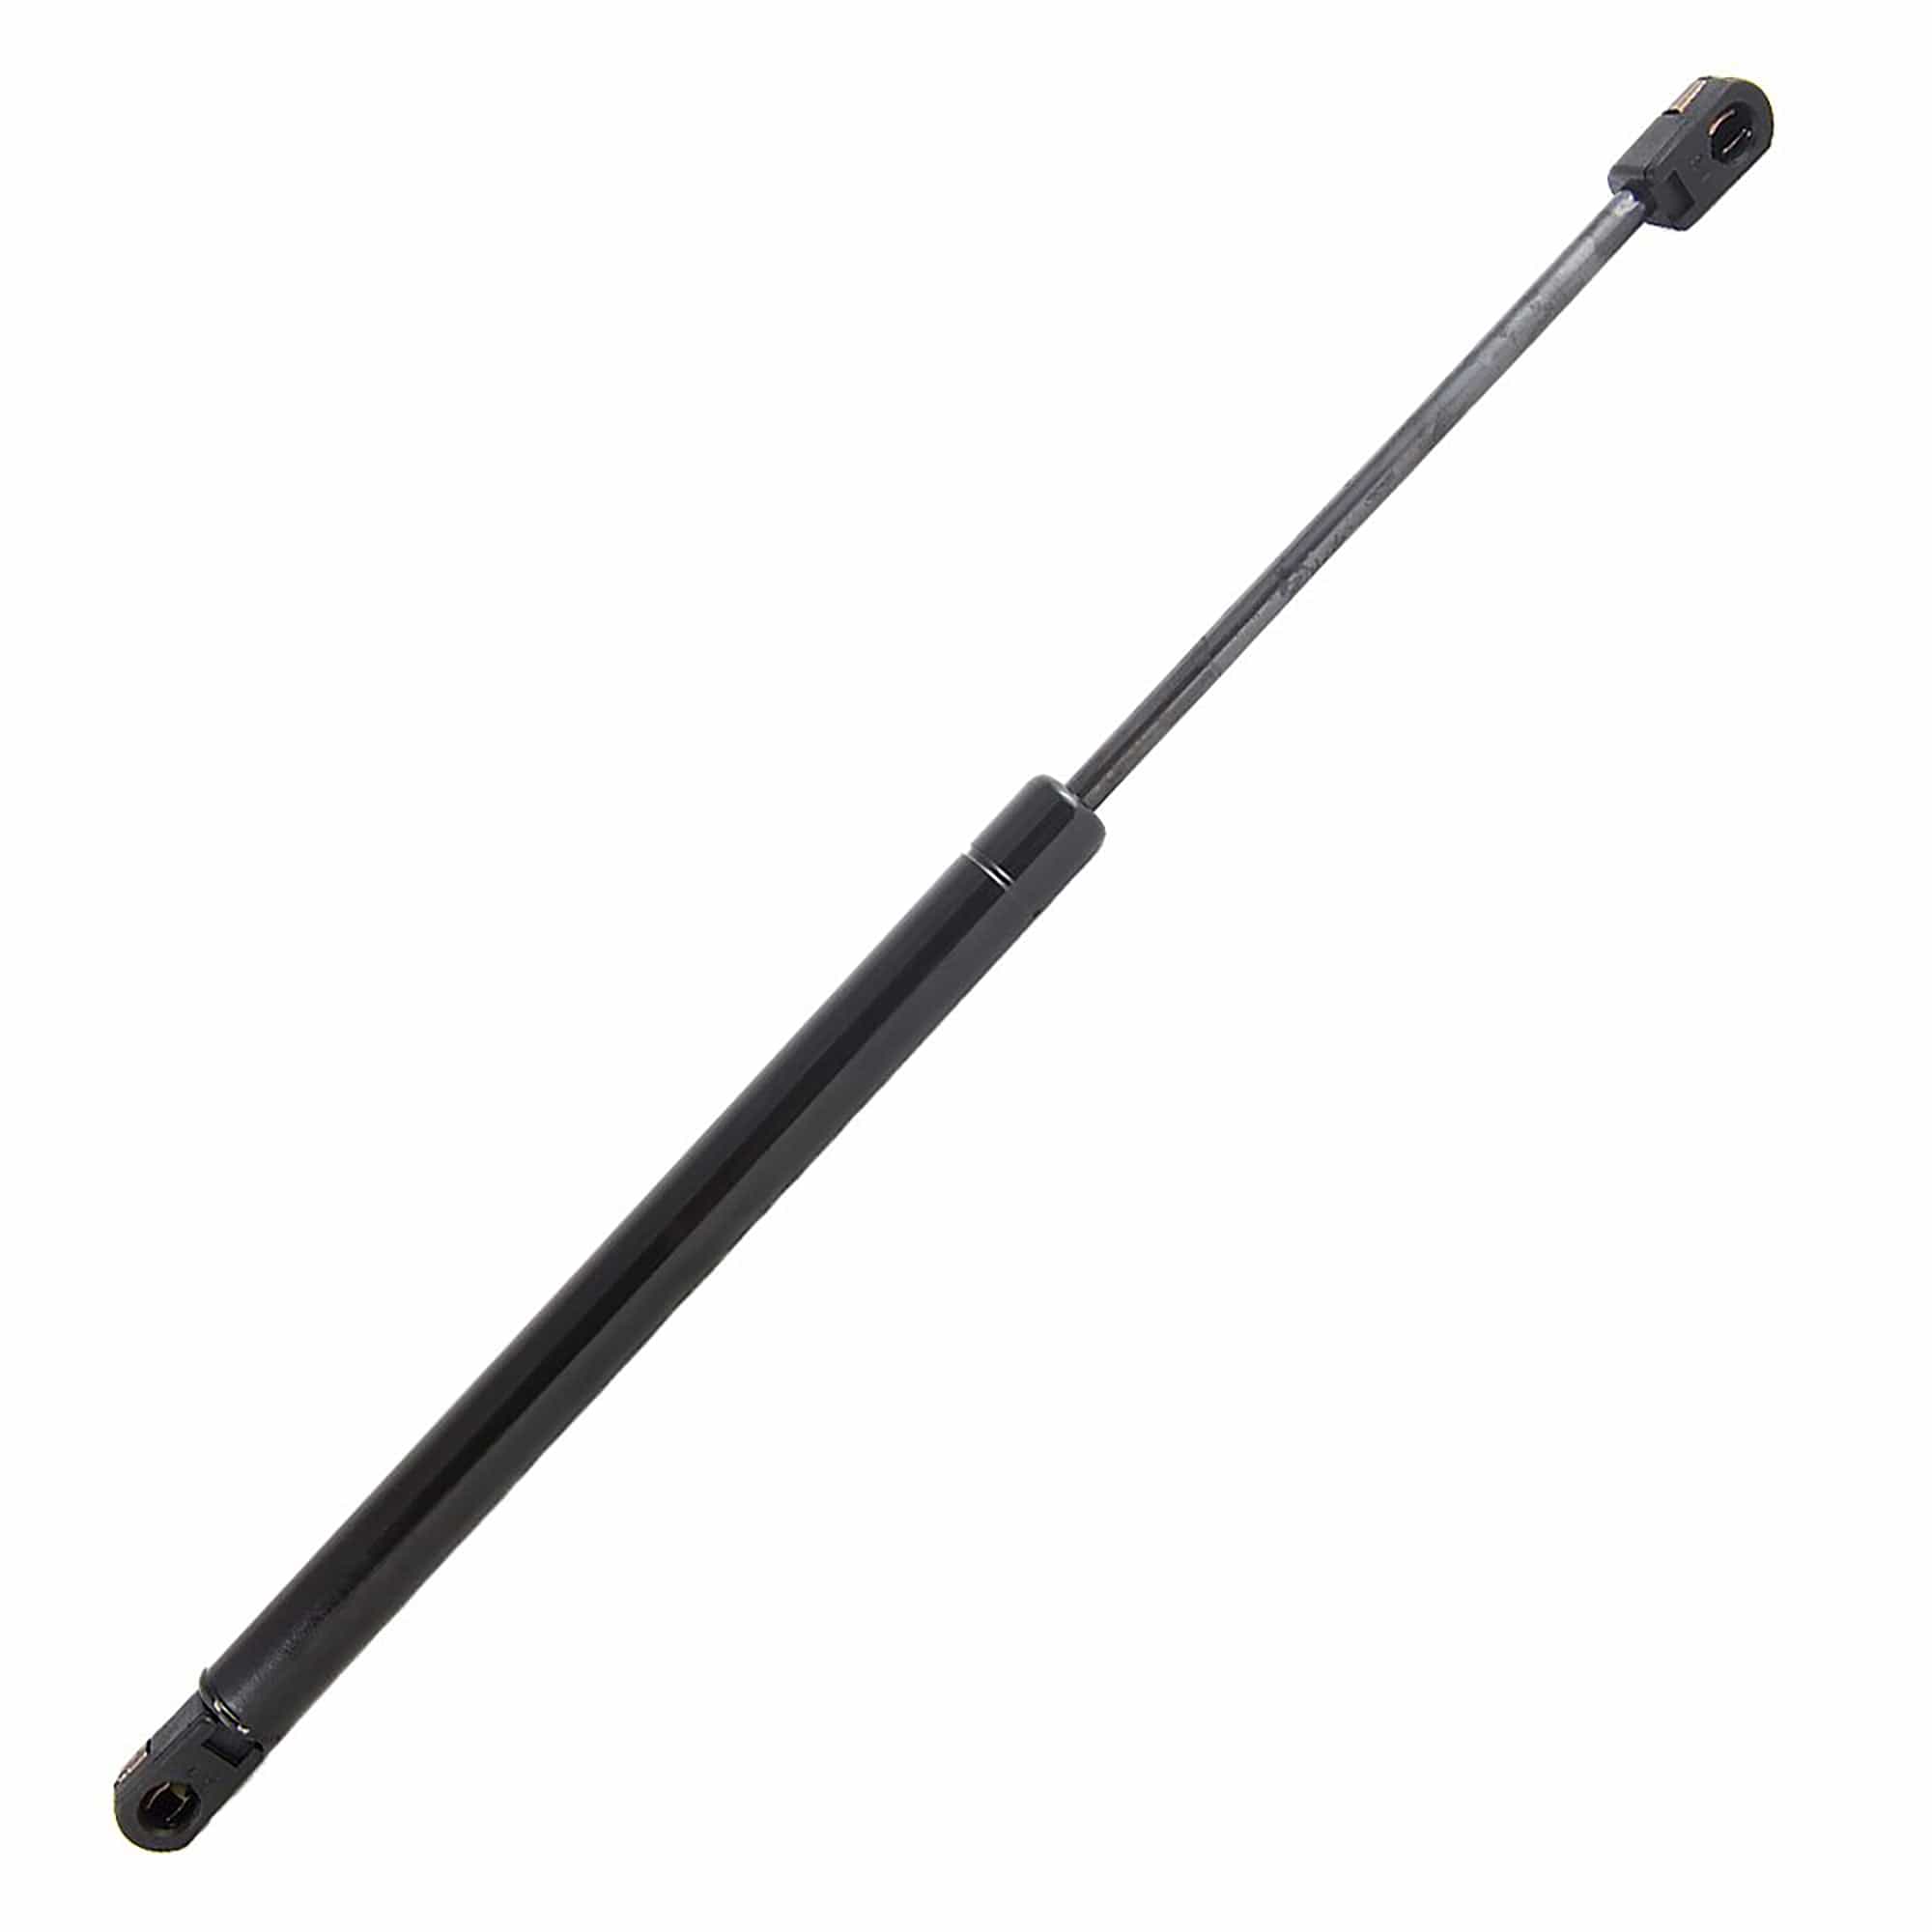 30 Lb. Gas Prop Lift Support 10.2" Comp. - 17.5" Ext. 7.3" Stroke AP Products 010-144